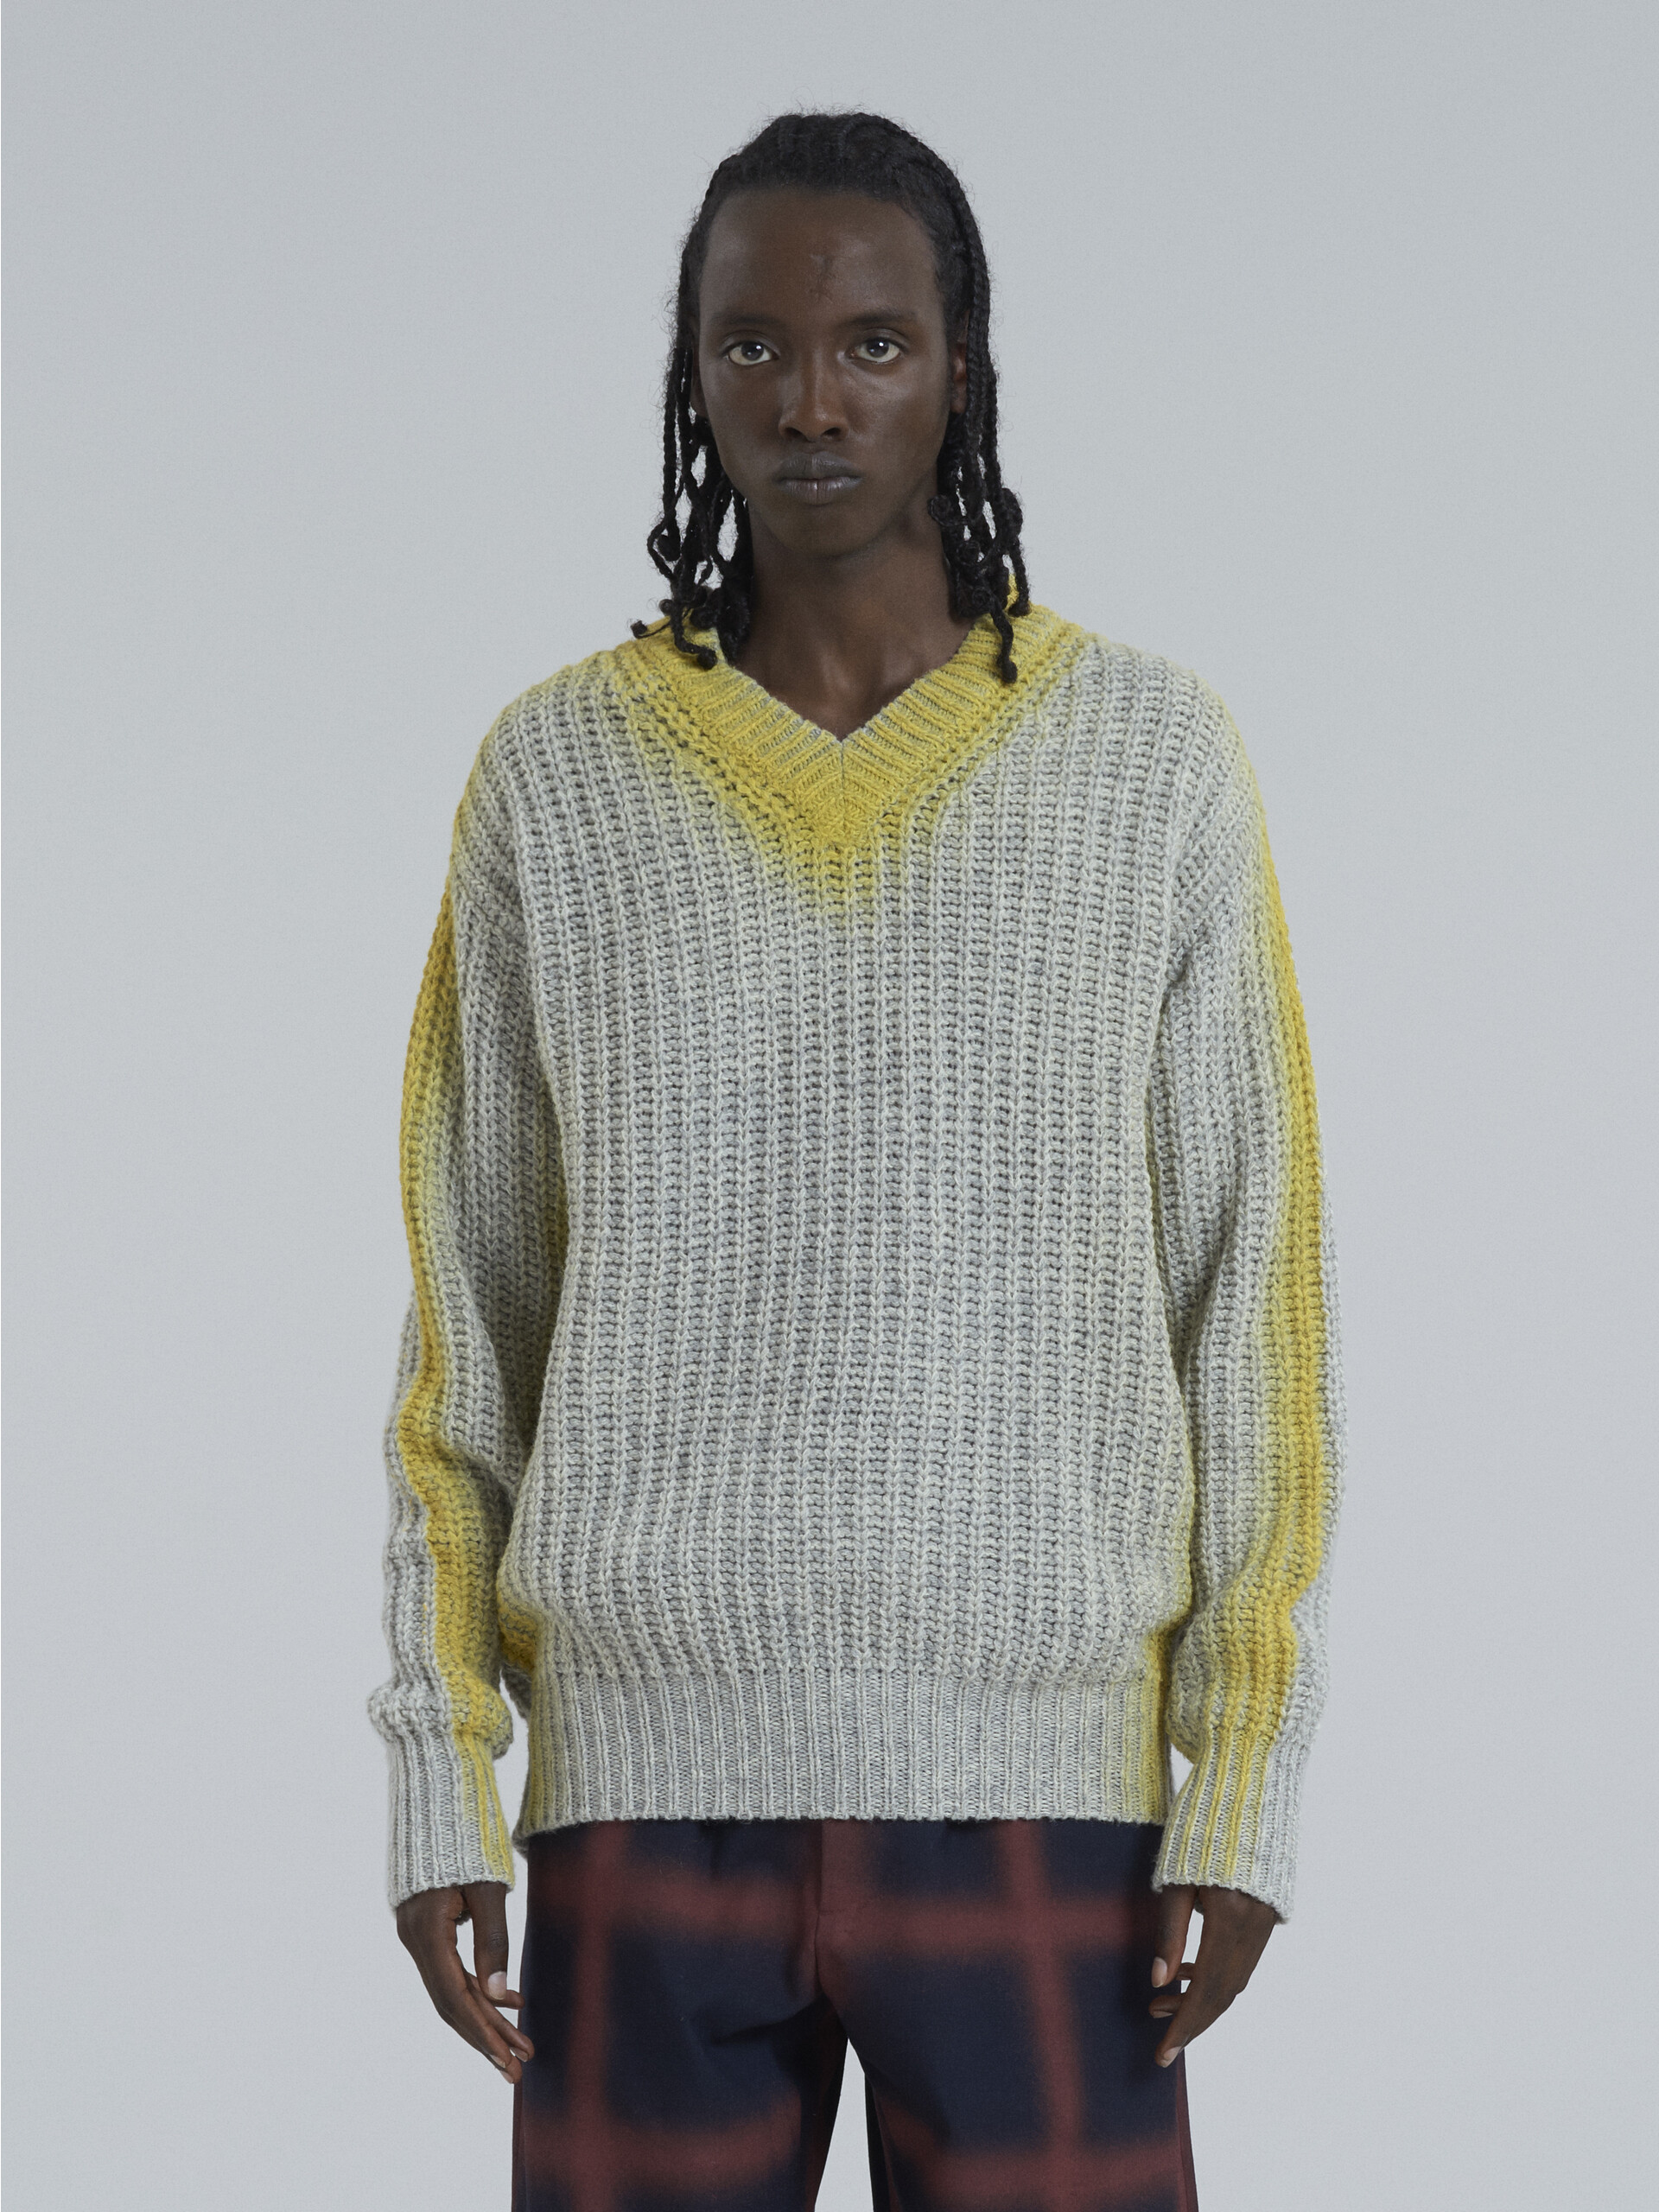 Mouliné Shetland wool sweater with contrast-sprayed sleeves and neckline - Pullovers - Image 2